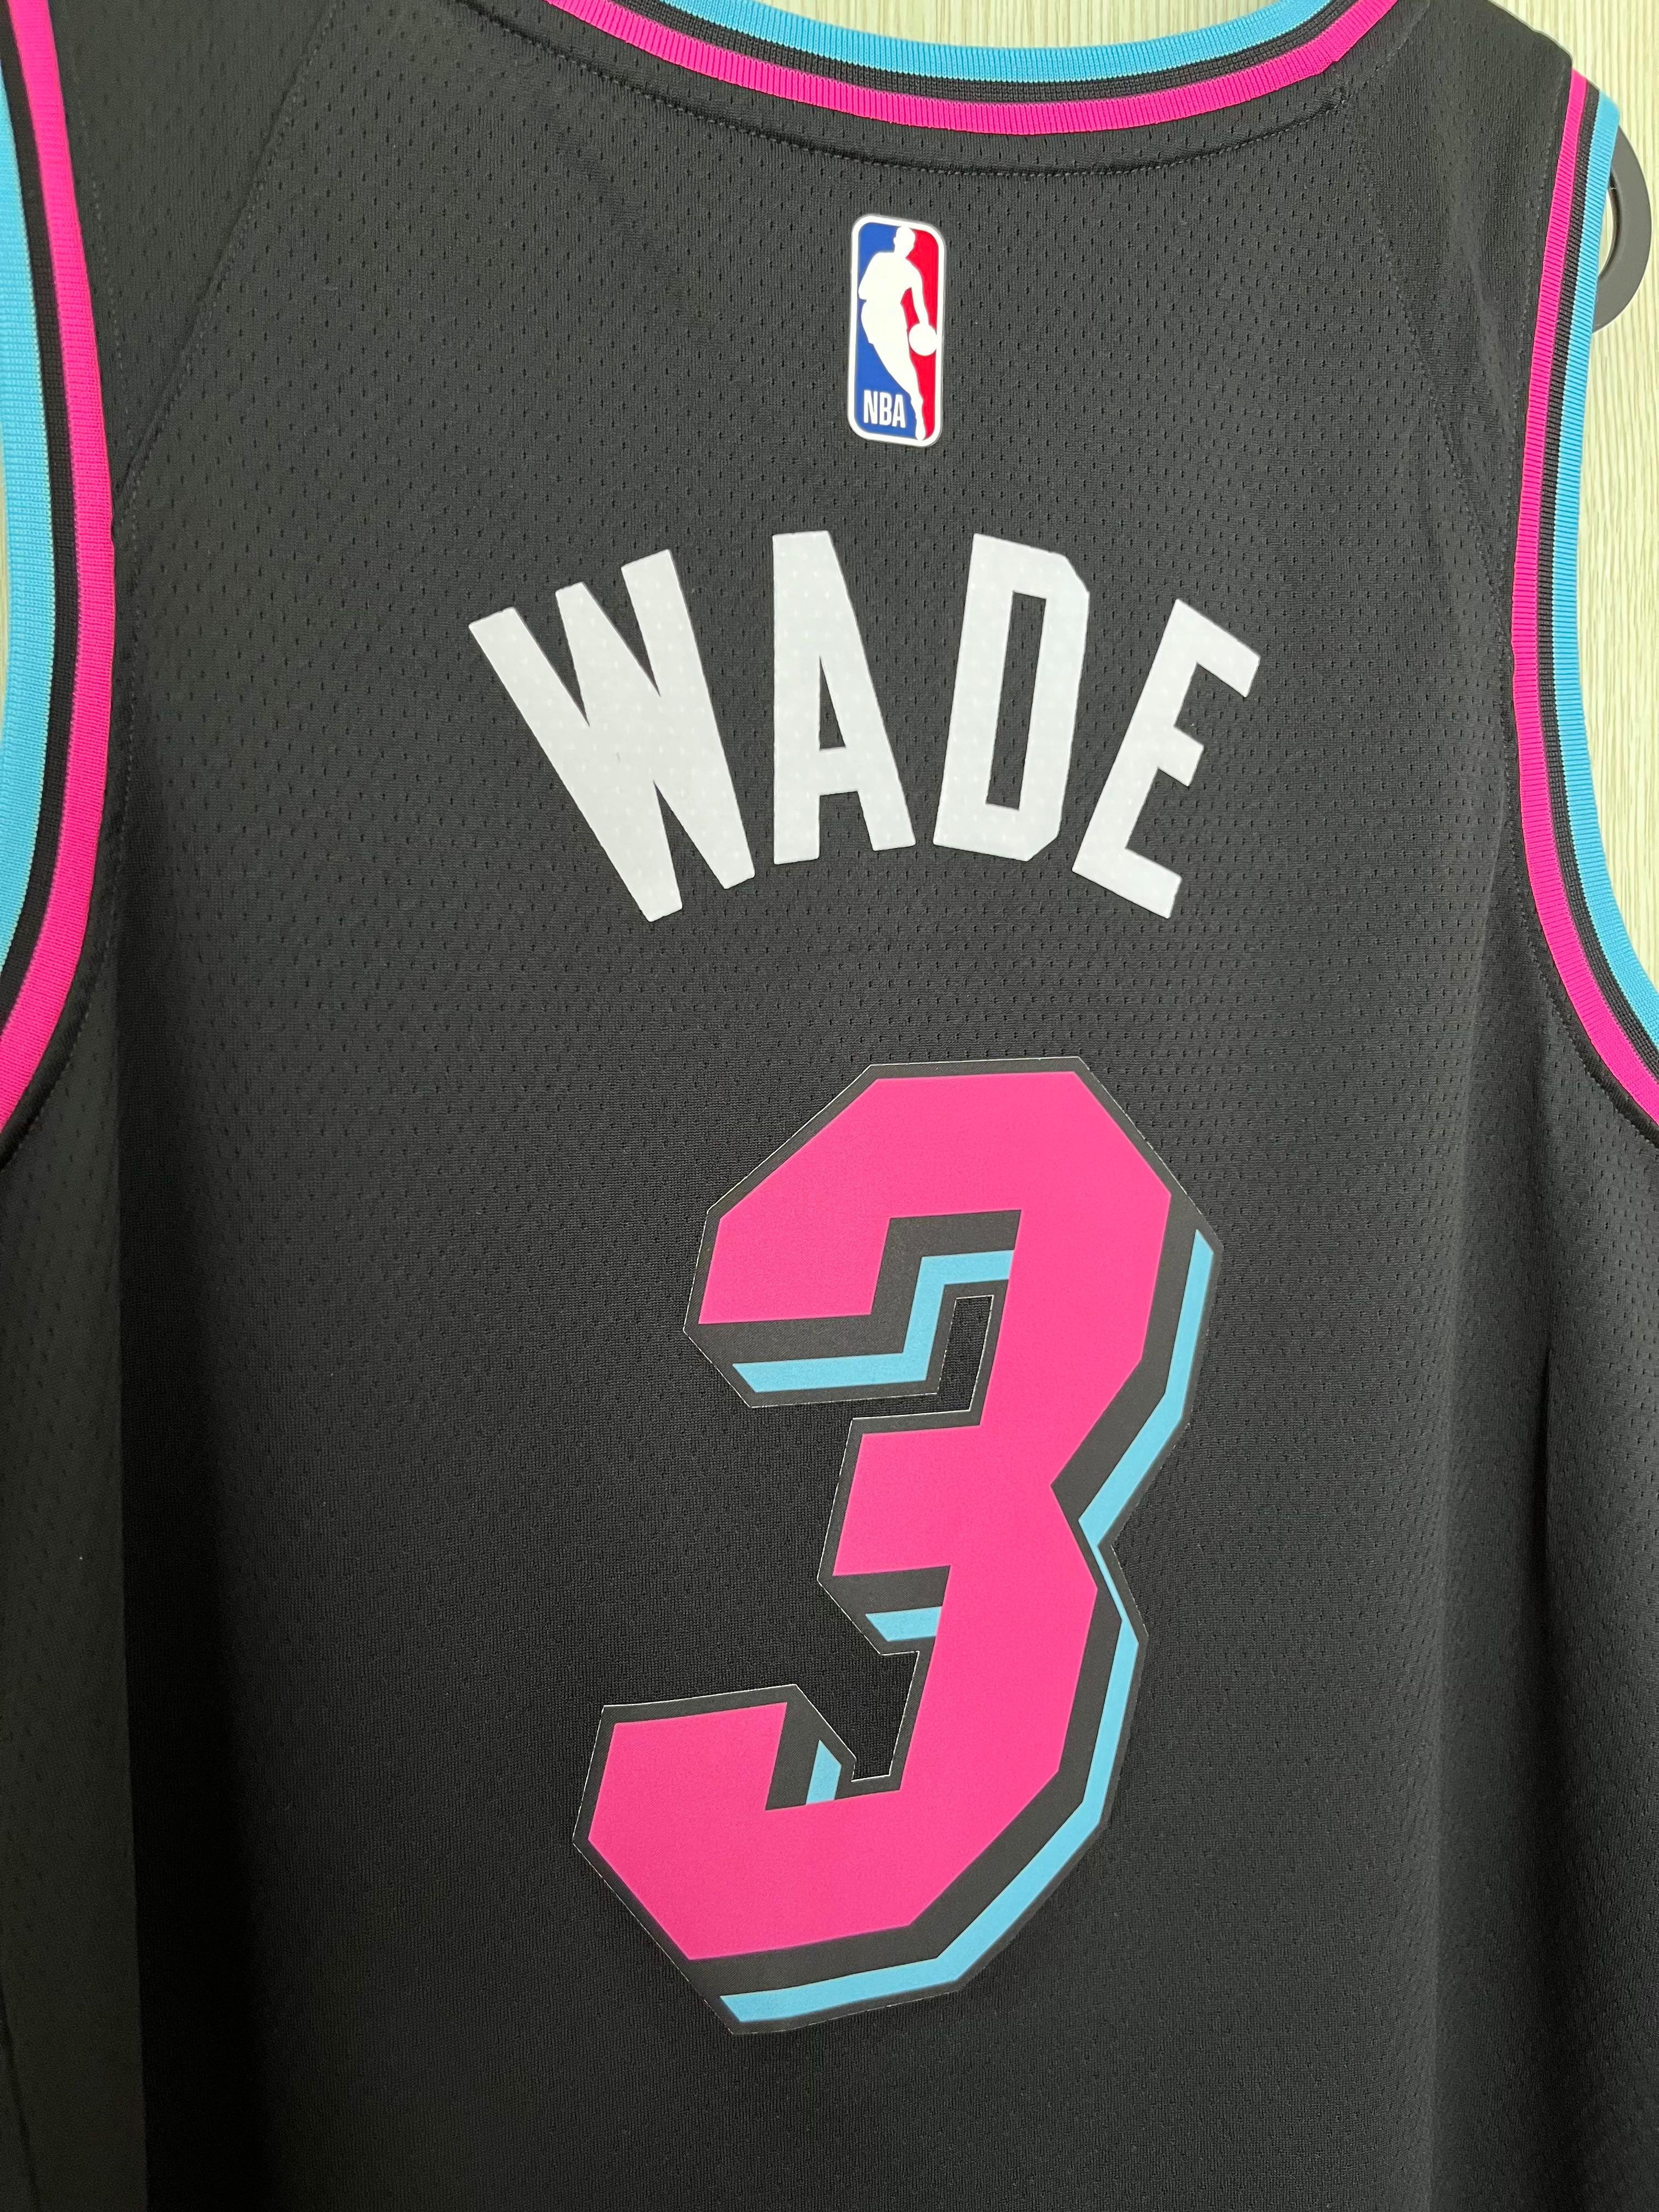 miamiheat's “Vice Nights” jerseys were the #1 selling City Edition jersey  in the NBA. #uniswag